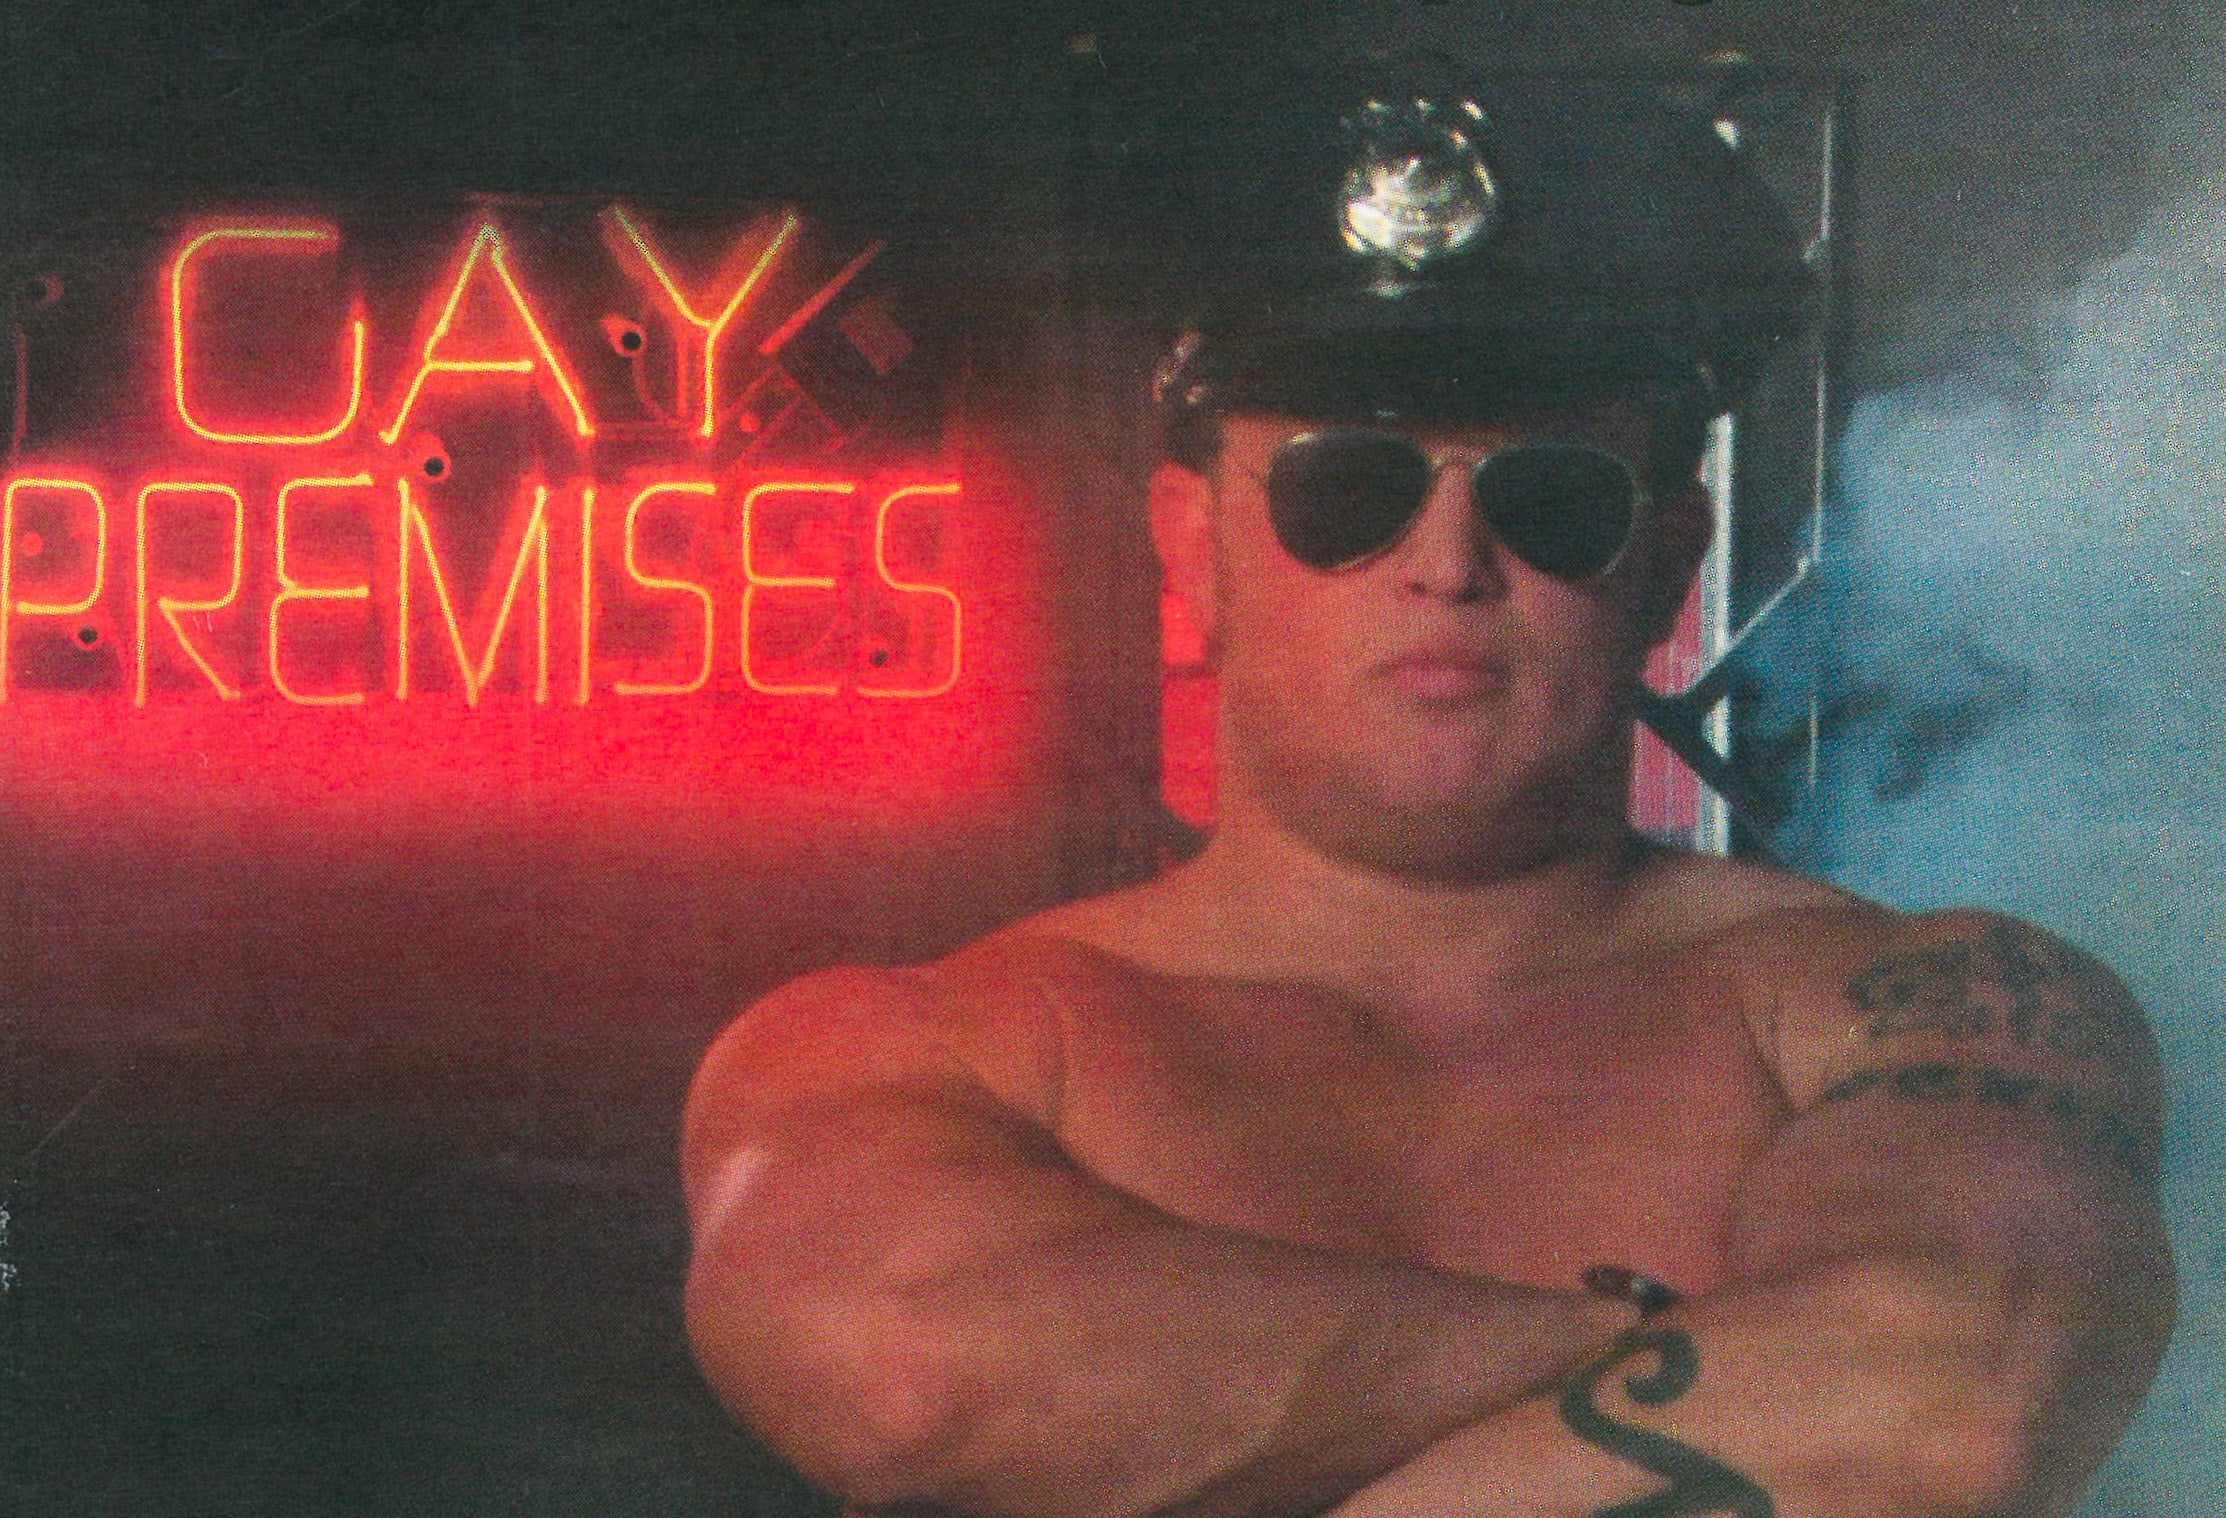 An image from the January 2003 issue of Outlooks magazine featuring a shirtless man wearing an officer's cap in front of the Goliath's Saunatel "Gay Premises" sign.